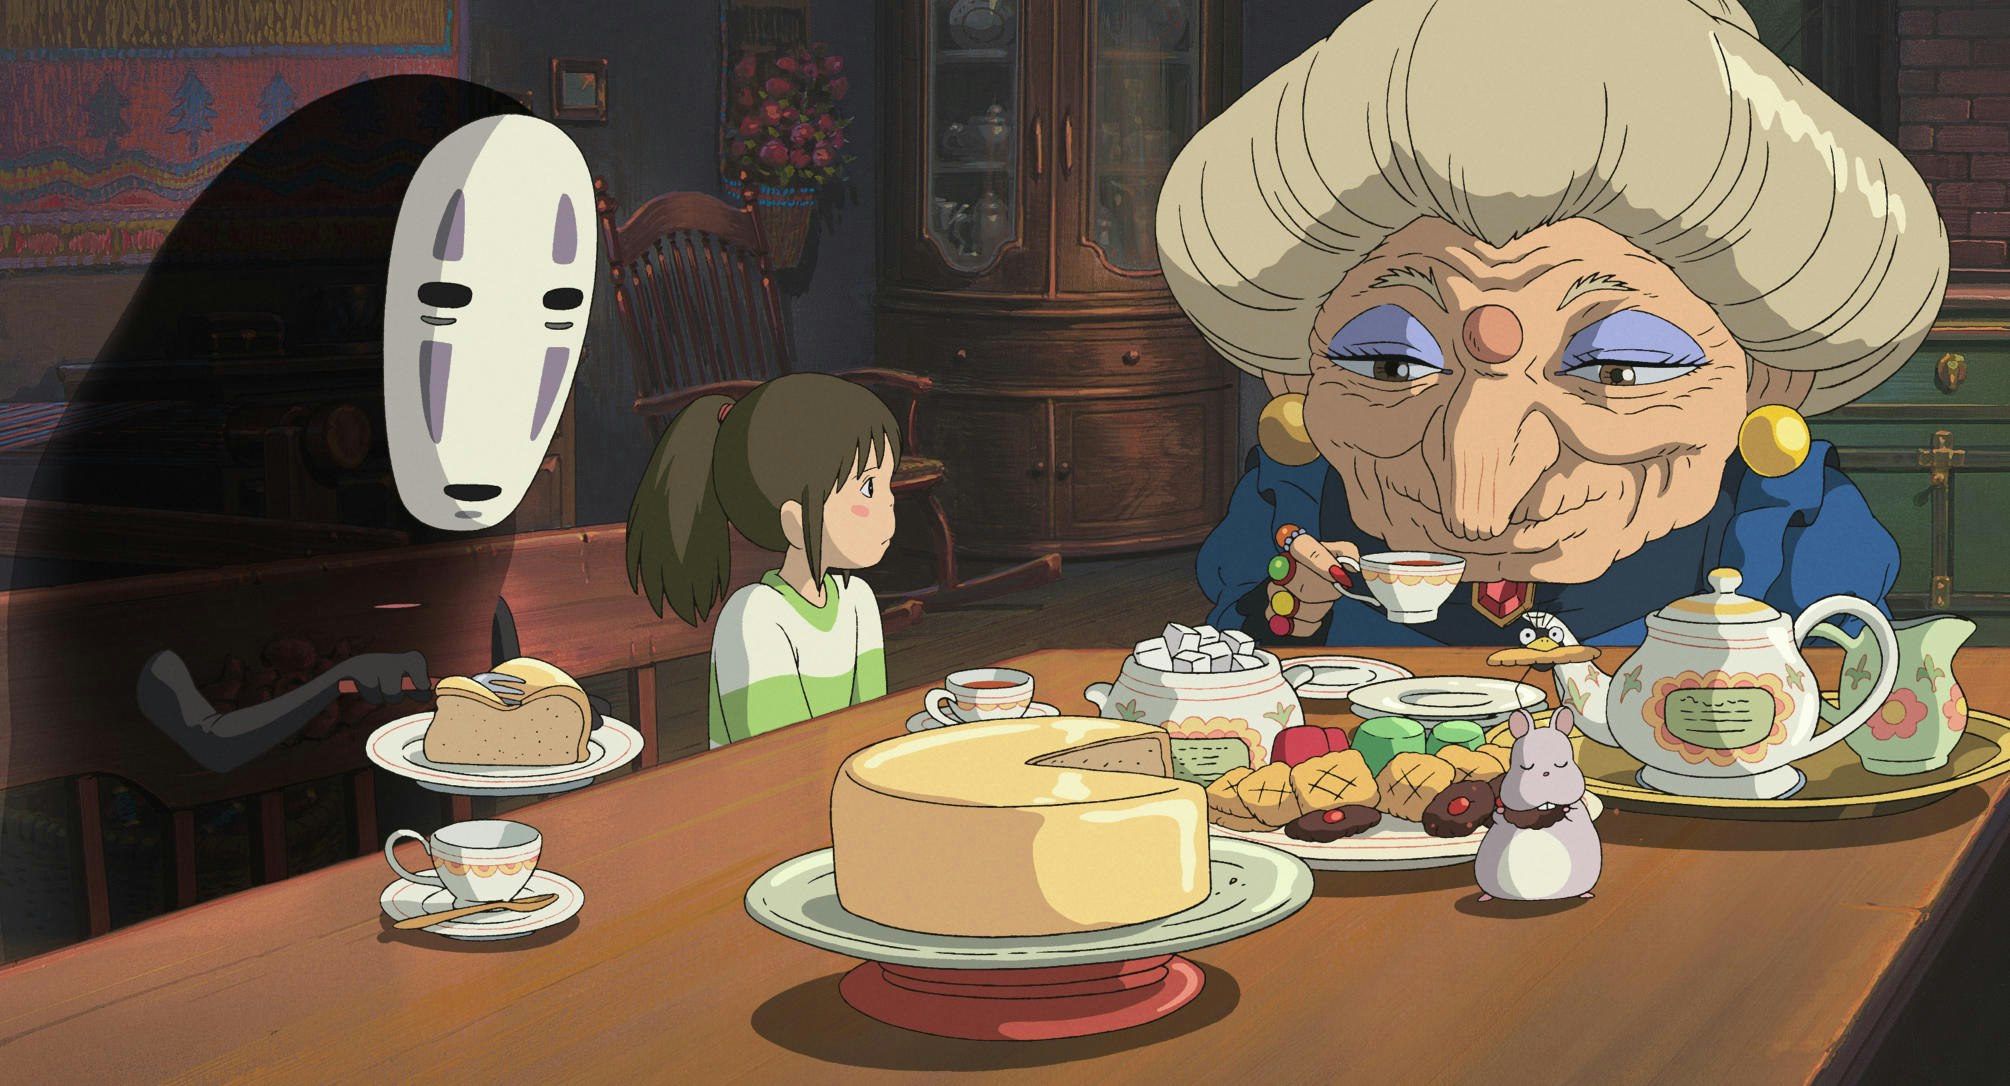 A scene from the anime movie 'Spirited Away'; young girl Chihiro is sitting at a table having tea and cake with two magical characters.